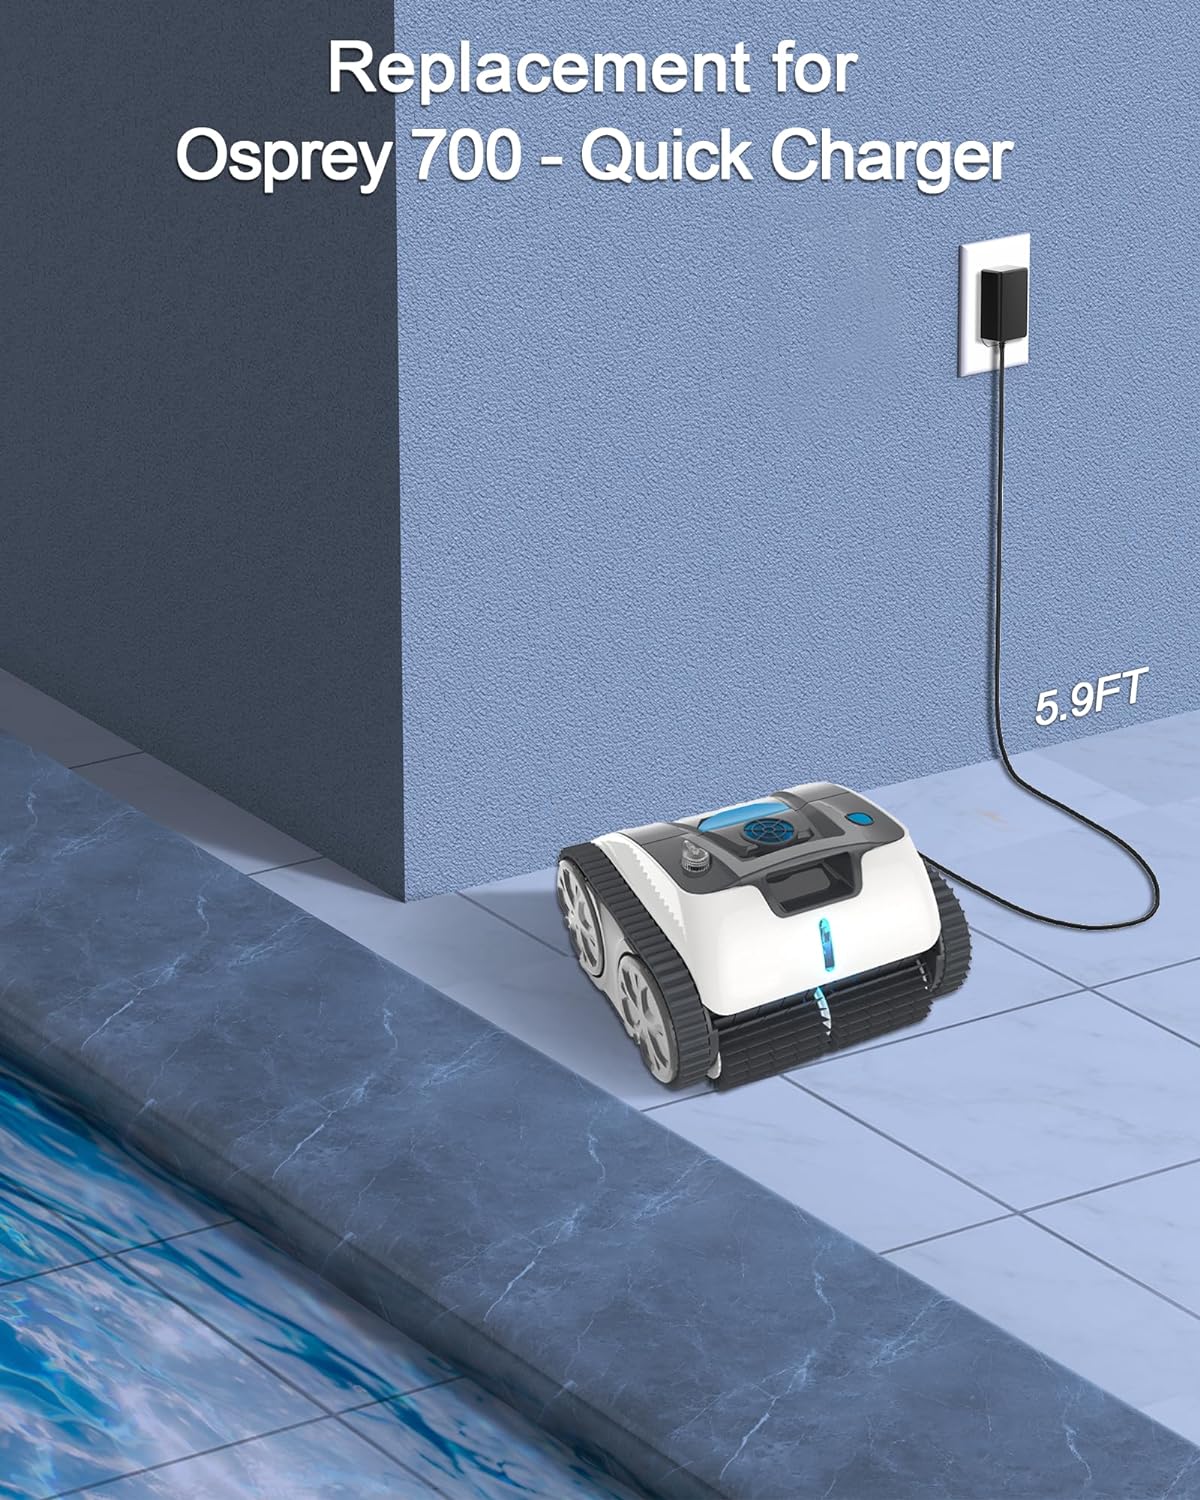 Replacement for WYBOT Osprey 700 Cordless Robotic Pool Cleaner Charger, 12.6V Charger for Osprey700 Connectivity Techno - Click Image to Close